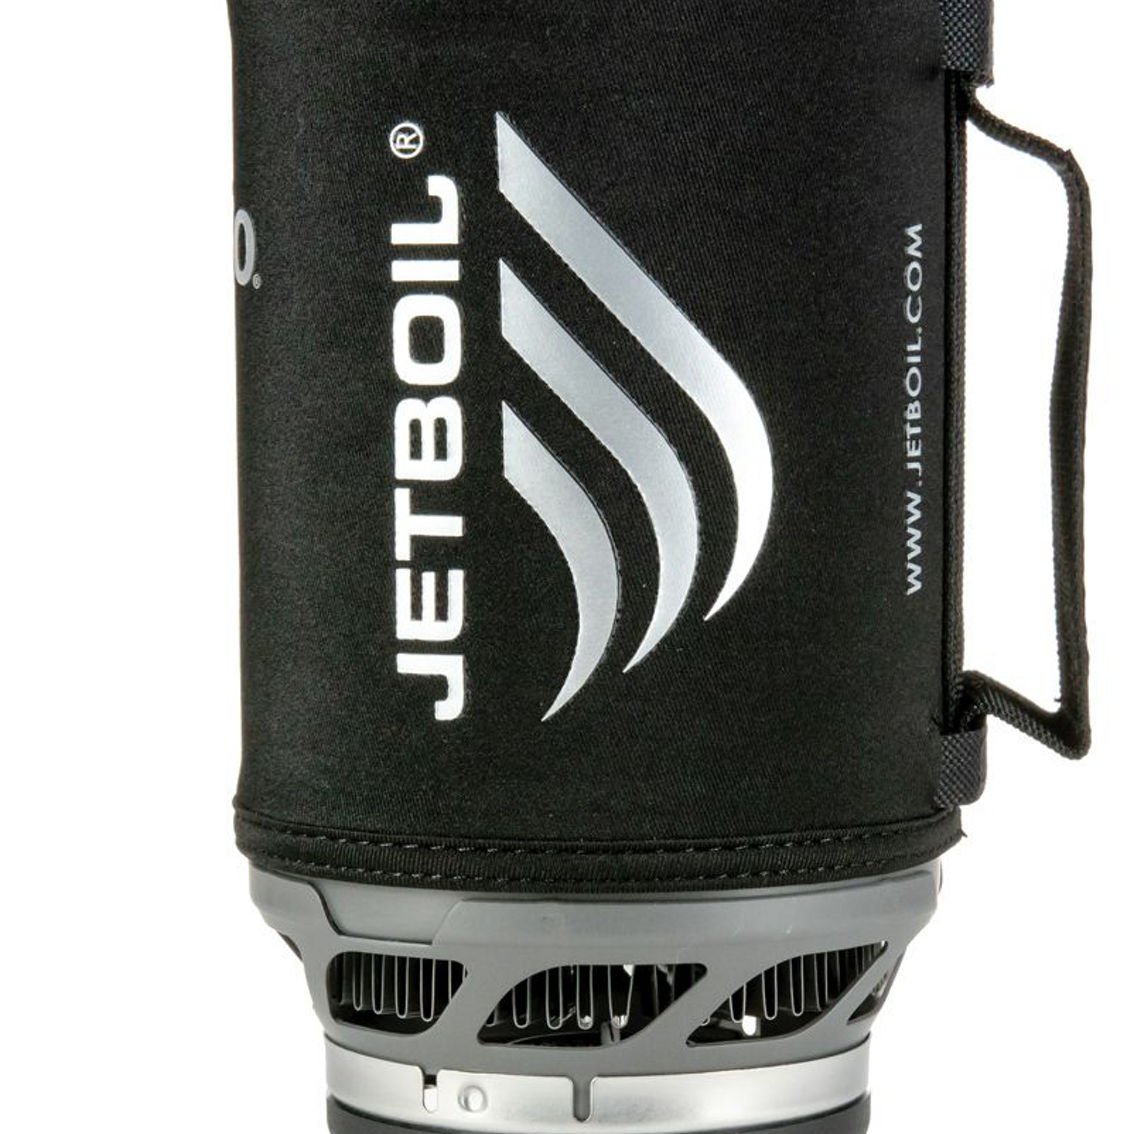 JETBOIL SUMO - Image 2 of 2